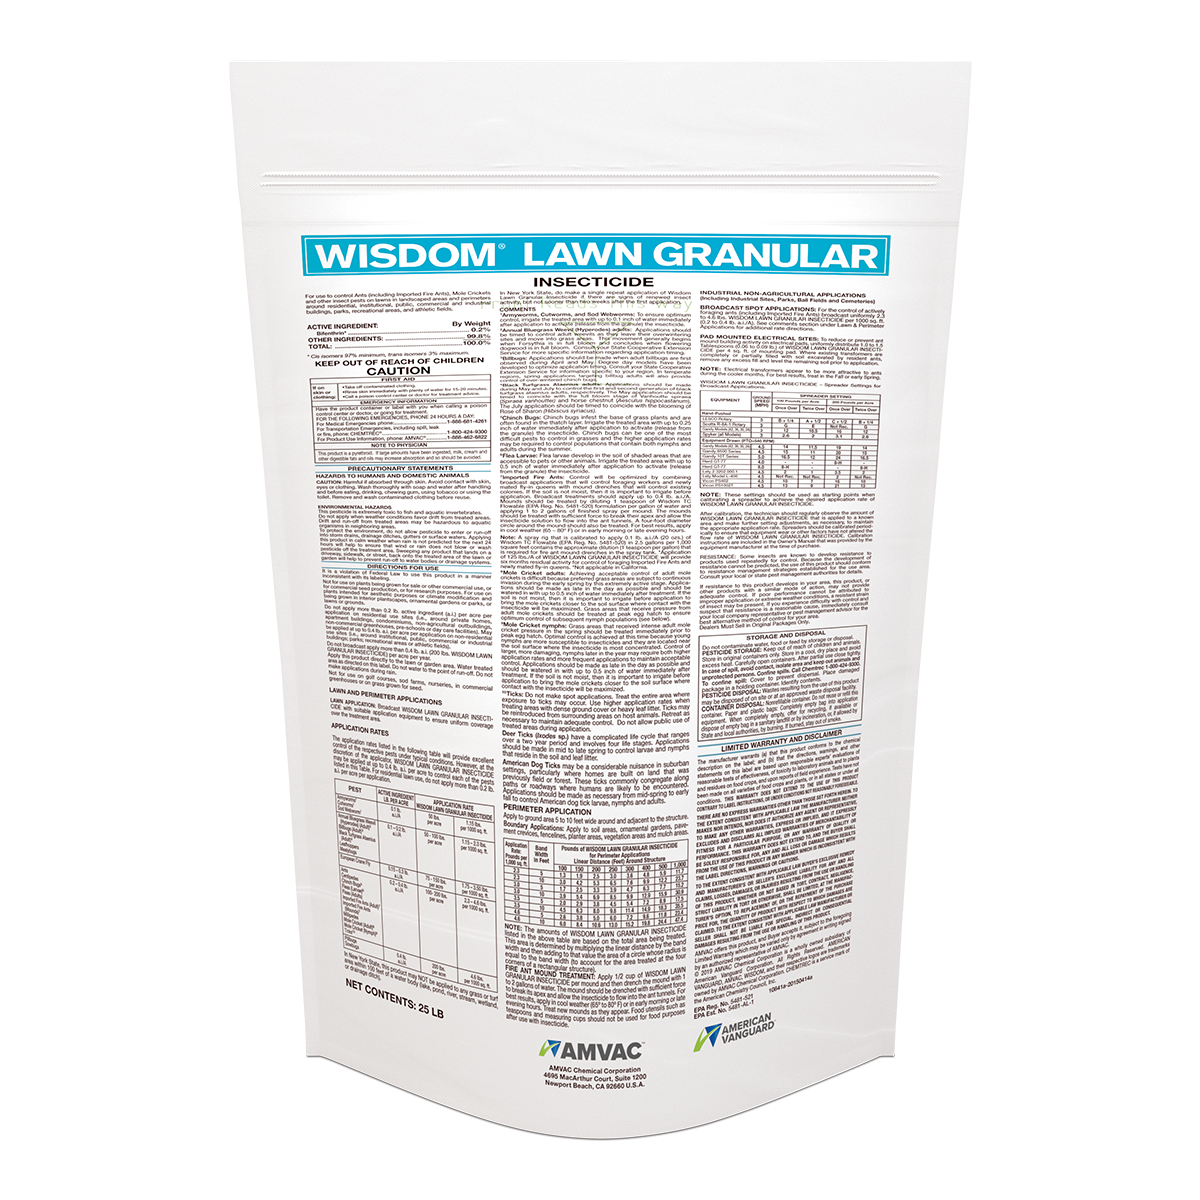 WISDOM LAWN GRANULAR INSECTICIDE product package